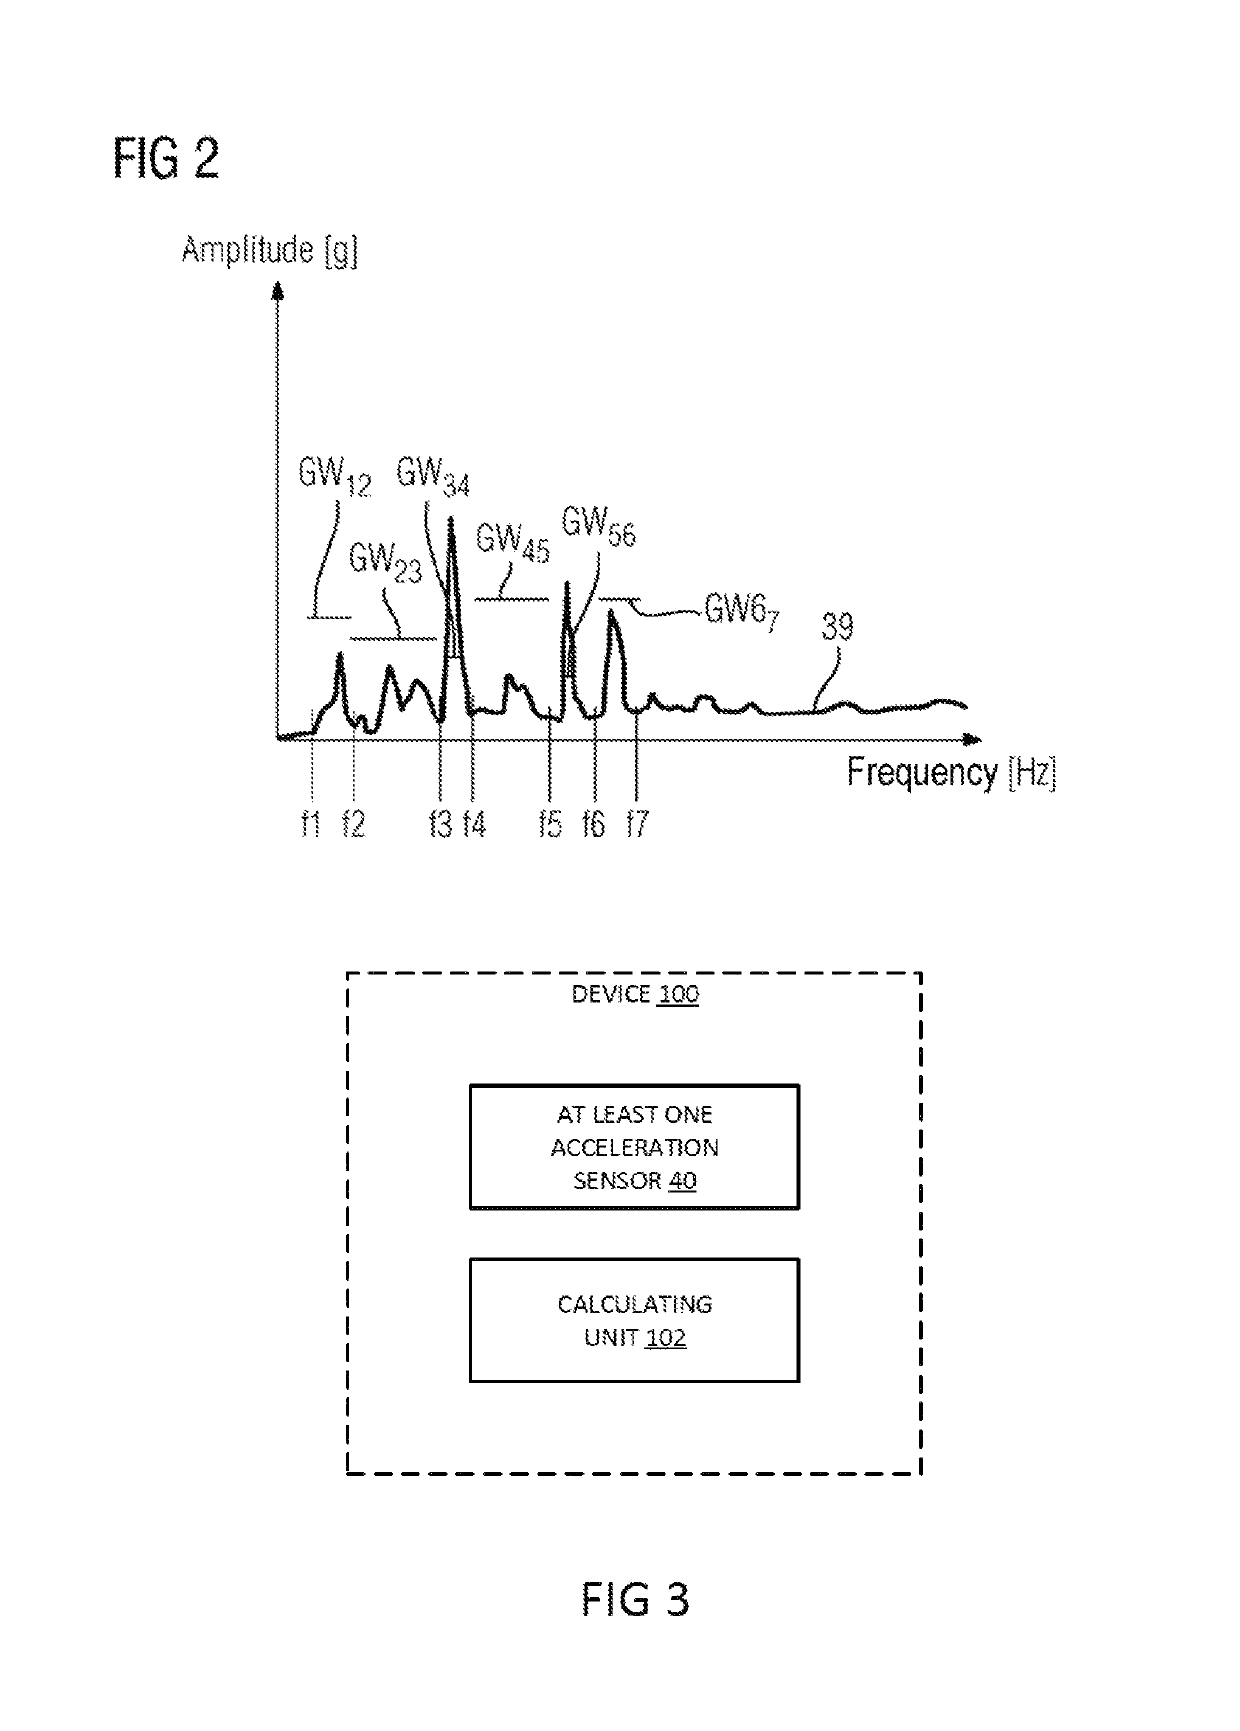 Method for monitoring the operation of a gas turbine